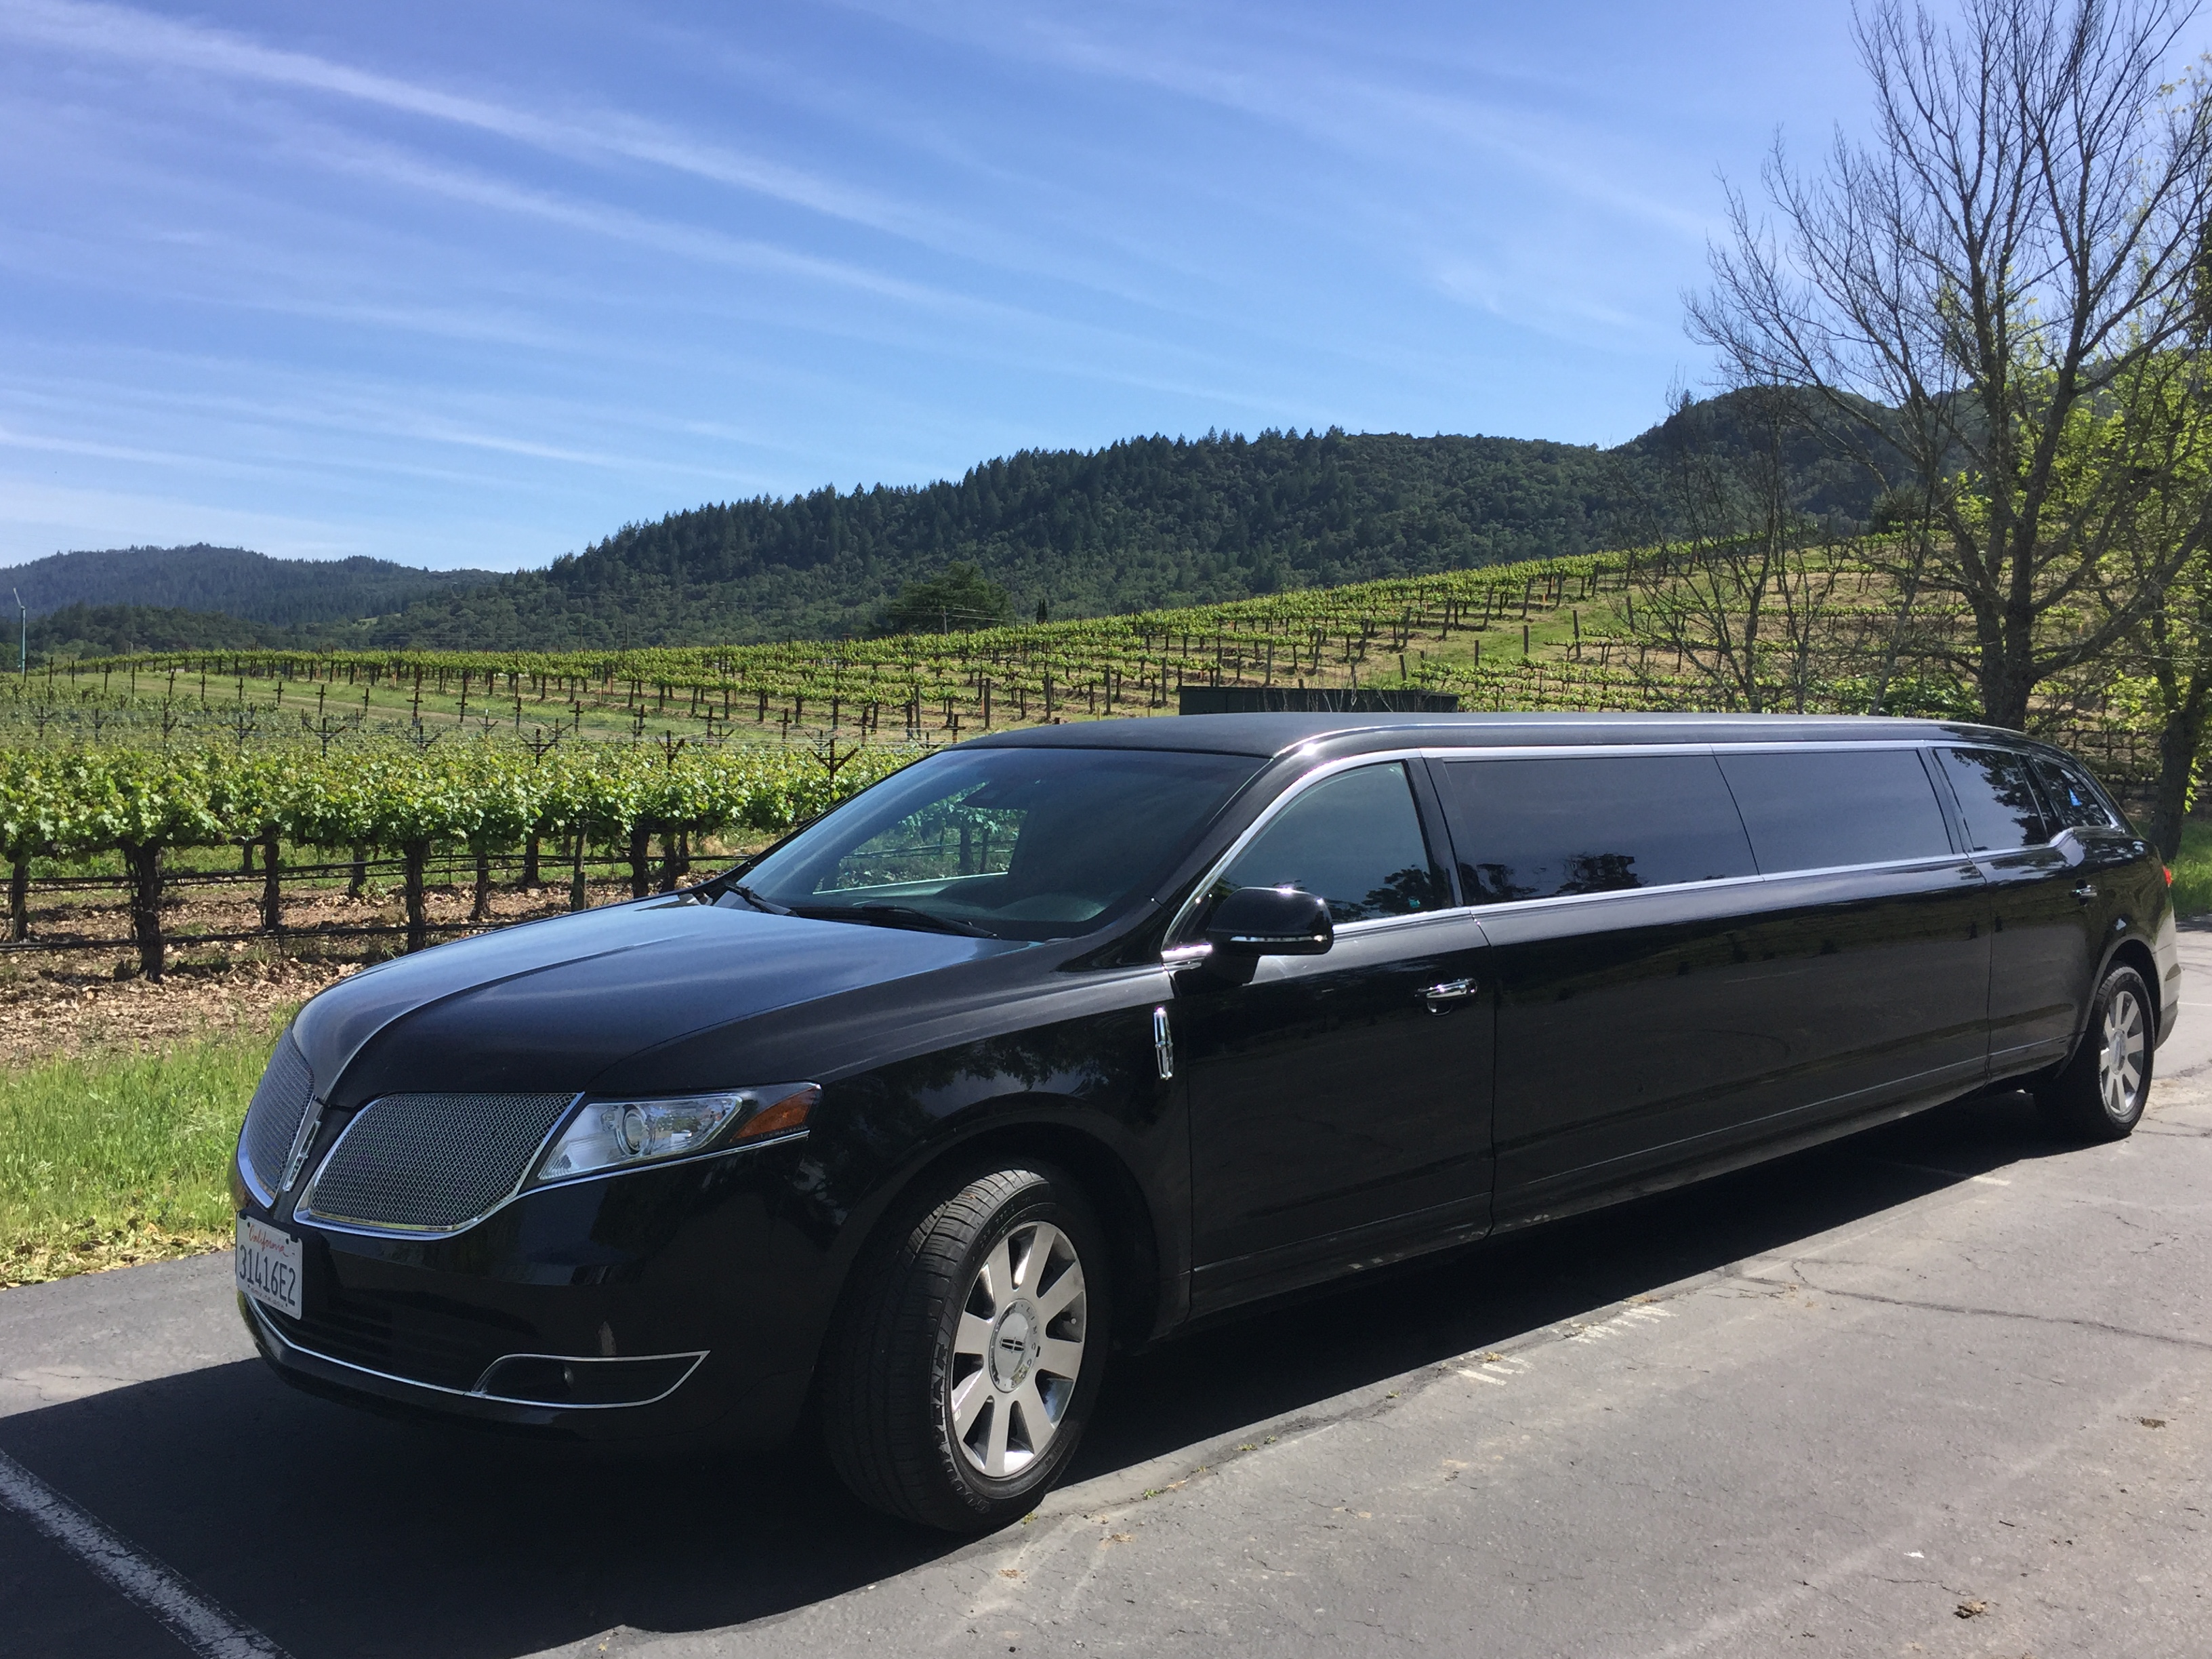 Lincoln Stretch MKT - All Towns Limo